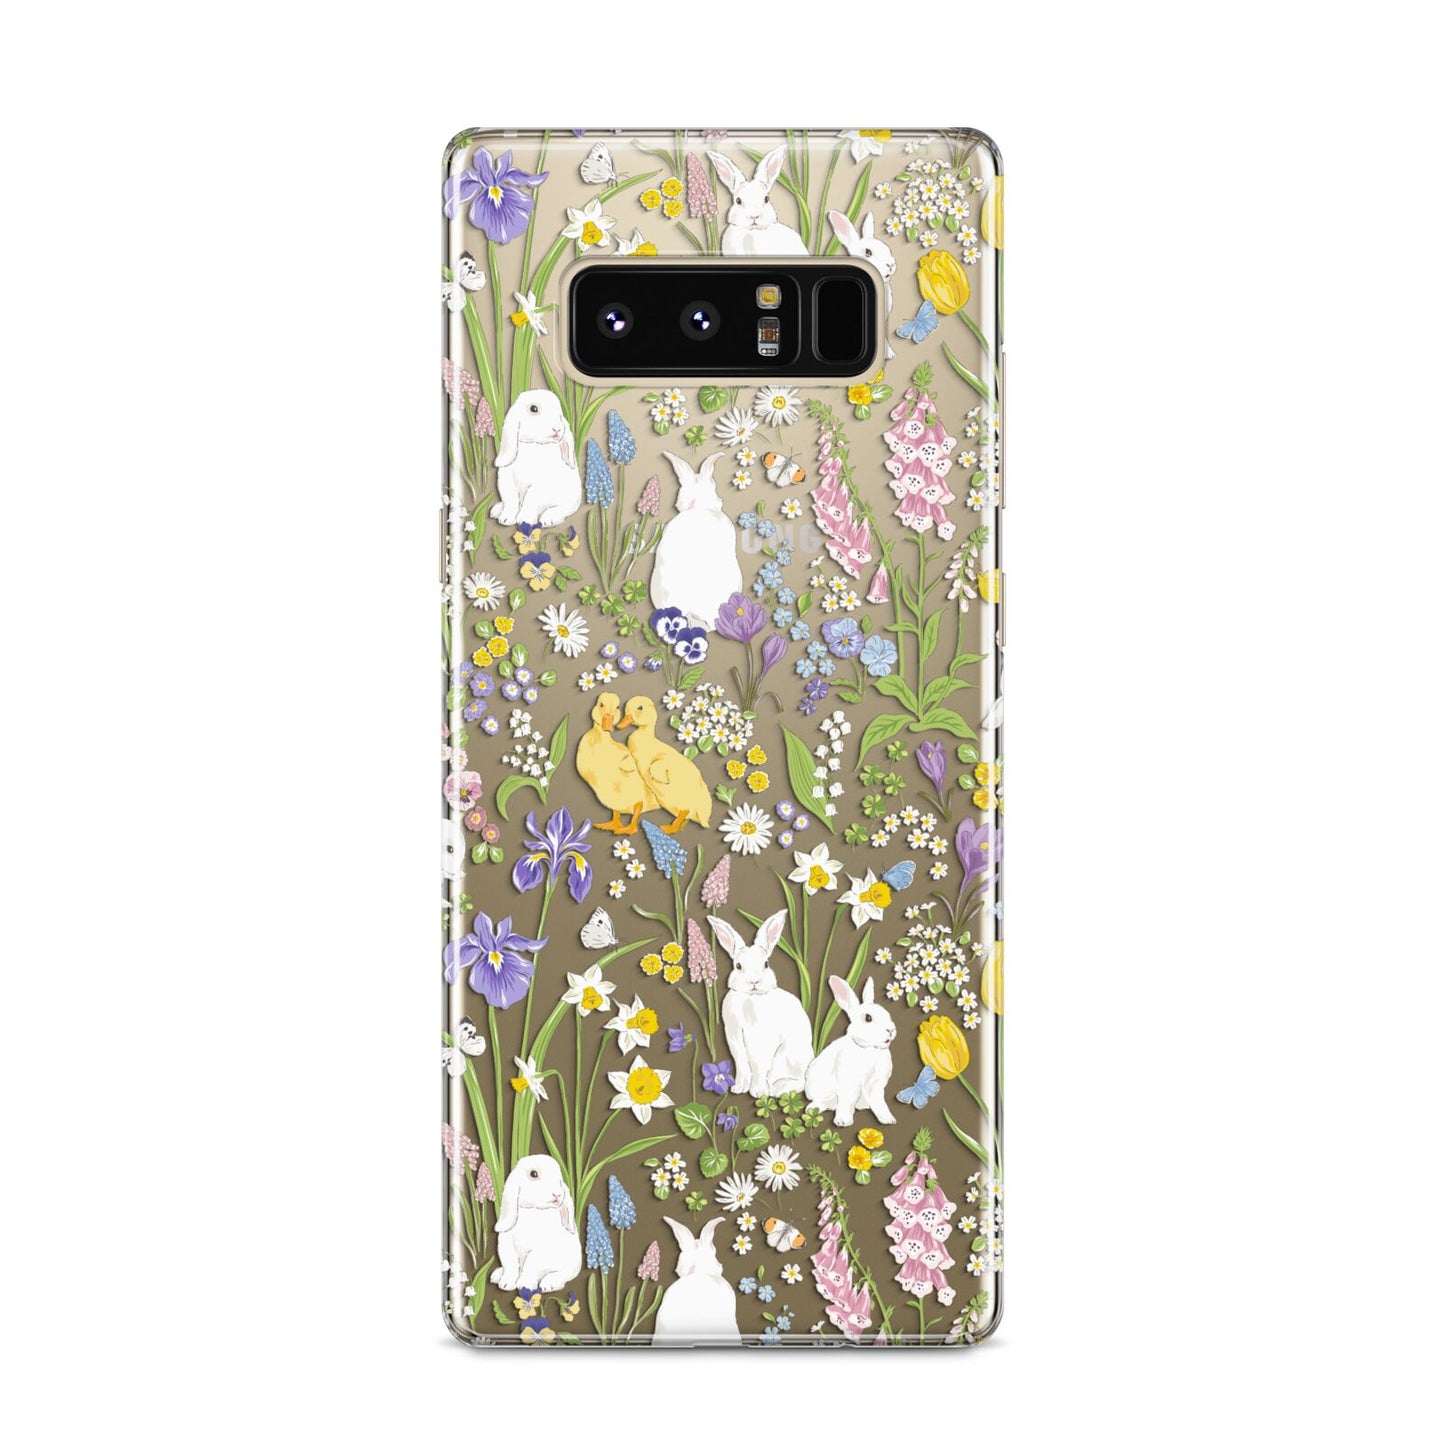 Easter Samsung Galaxy S8 Case